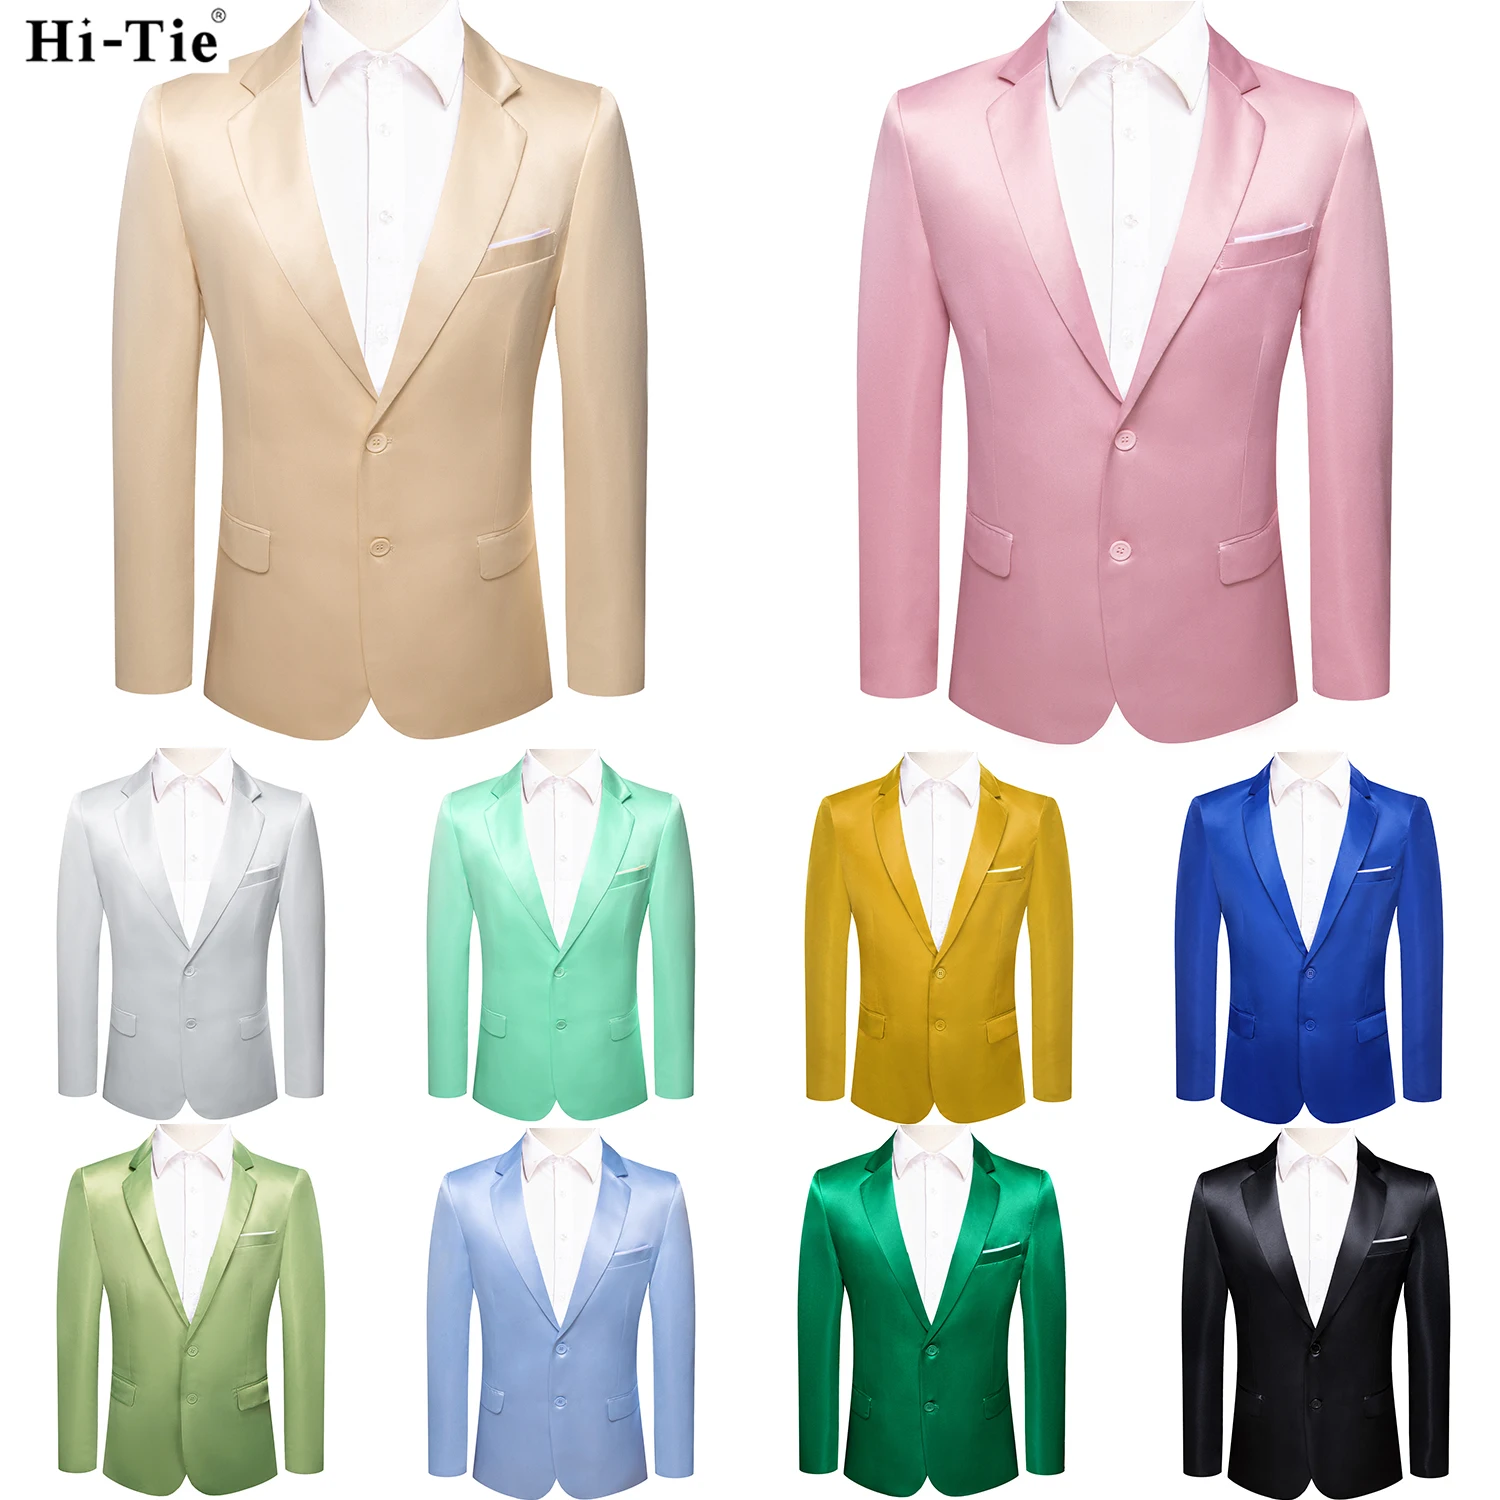 

Hi-Tie Champagne Jacquard Solid Mens Suit Shawl Collar Tuxedo Blazers Jacket Coat Groom Dress For Wedding Business Party